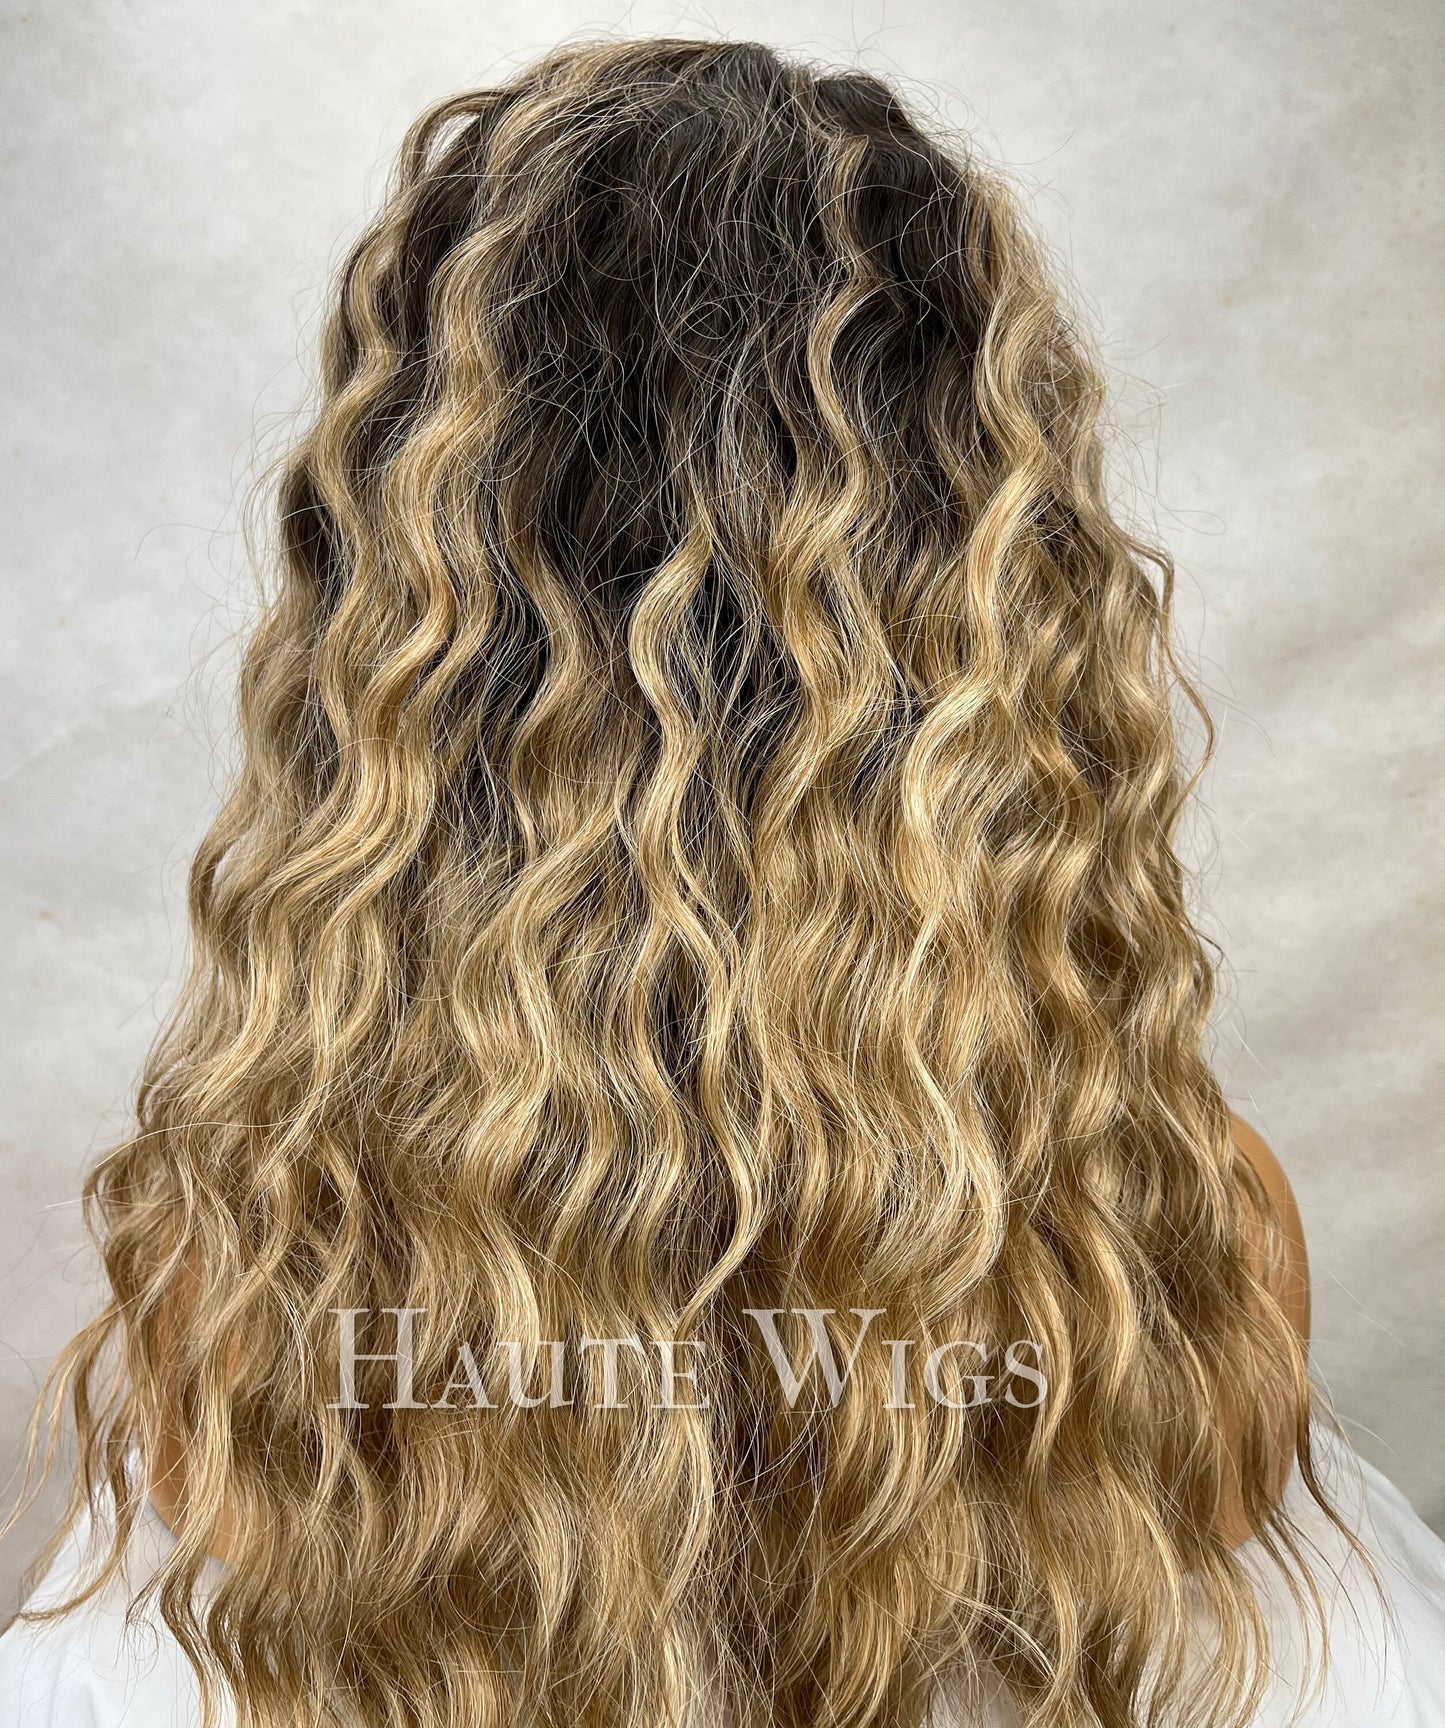 Waves don’t lie - Wig Dark Roots Ash Blonde Ombre Balayage Curly Lace Front Wavy Human Hair Blends Wigs Gift For Her